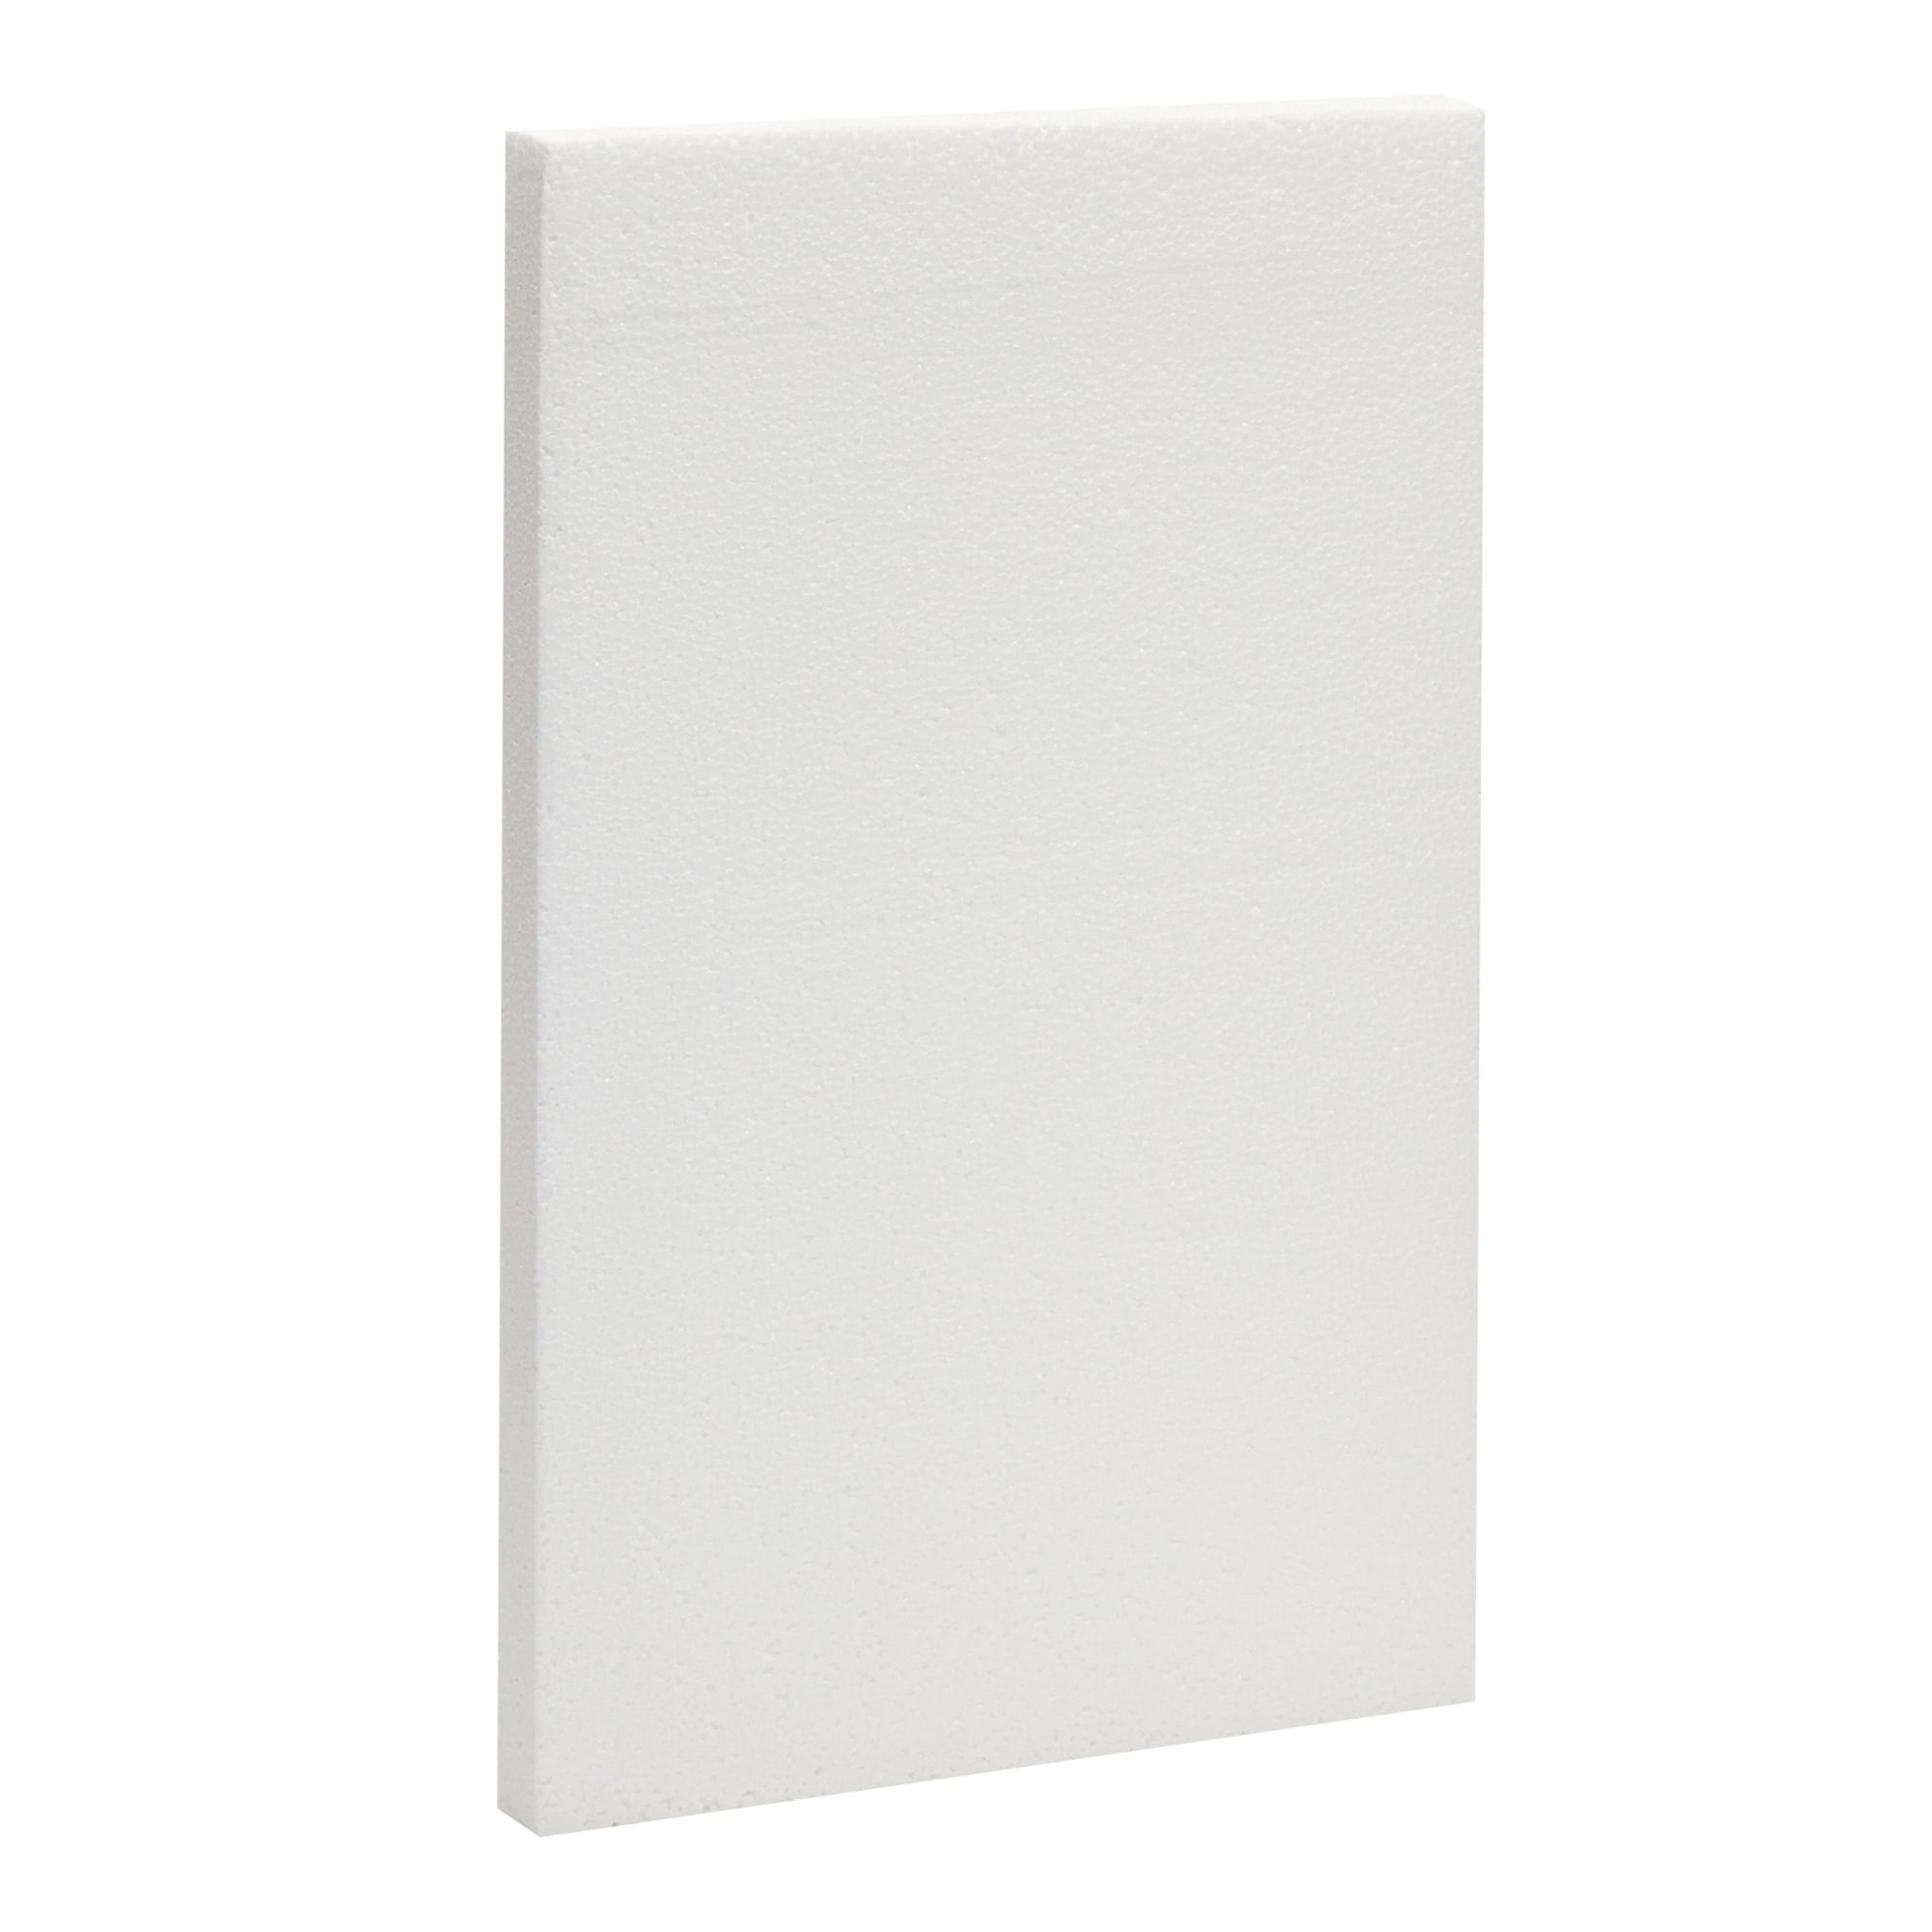 1 Inch Thick Foam Board Sheets - 6 Pack 17x11 Inch Polystyrene Rectangles  for DIY Crafts, Insulation, Sculptures, Models (White) 